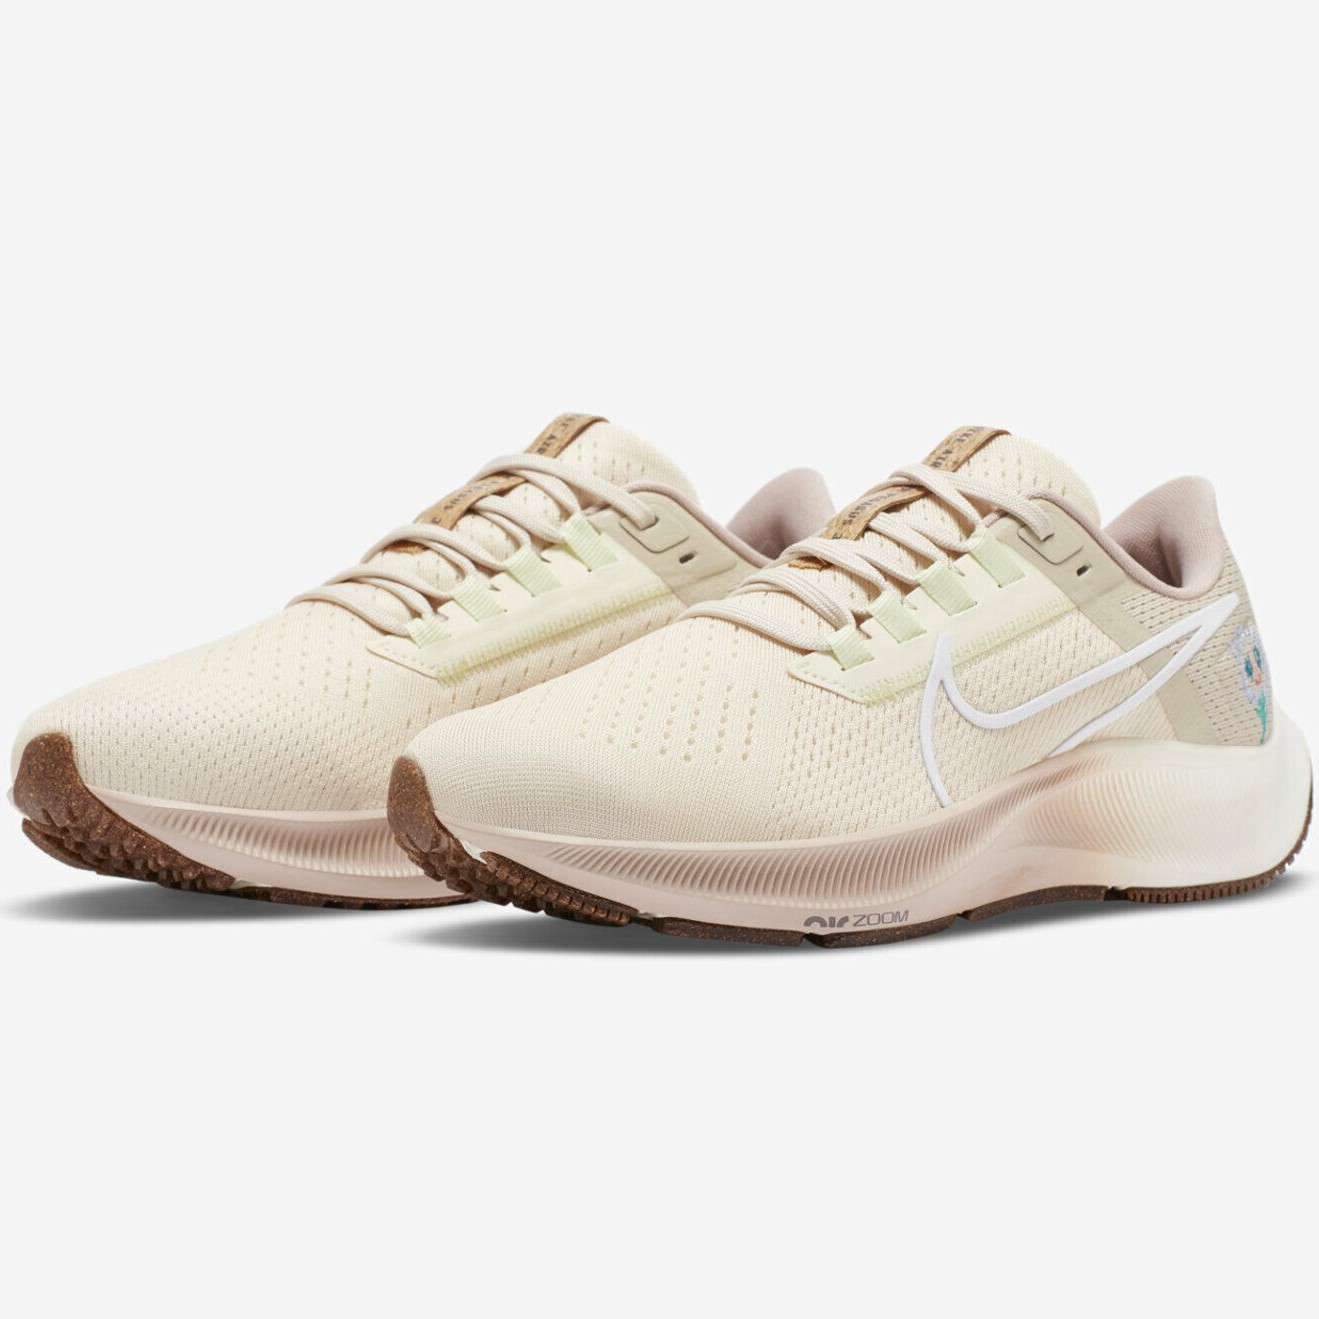 GIÀY THỂ THAO NIKE WMNS AIR ZOOM PEGASUS 38 WOMEN RUNNING SHOES BEIGE 10